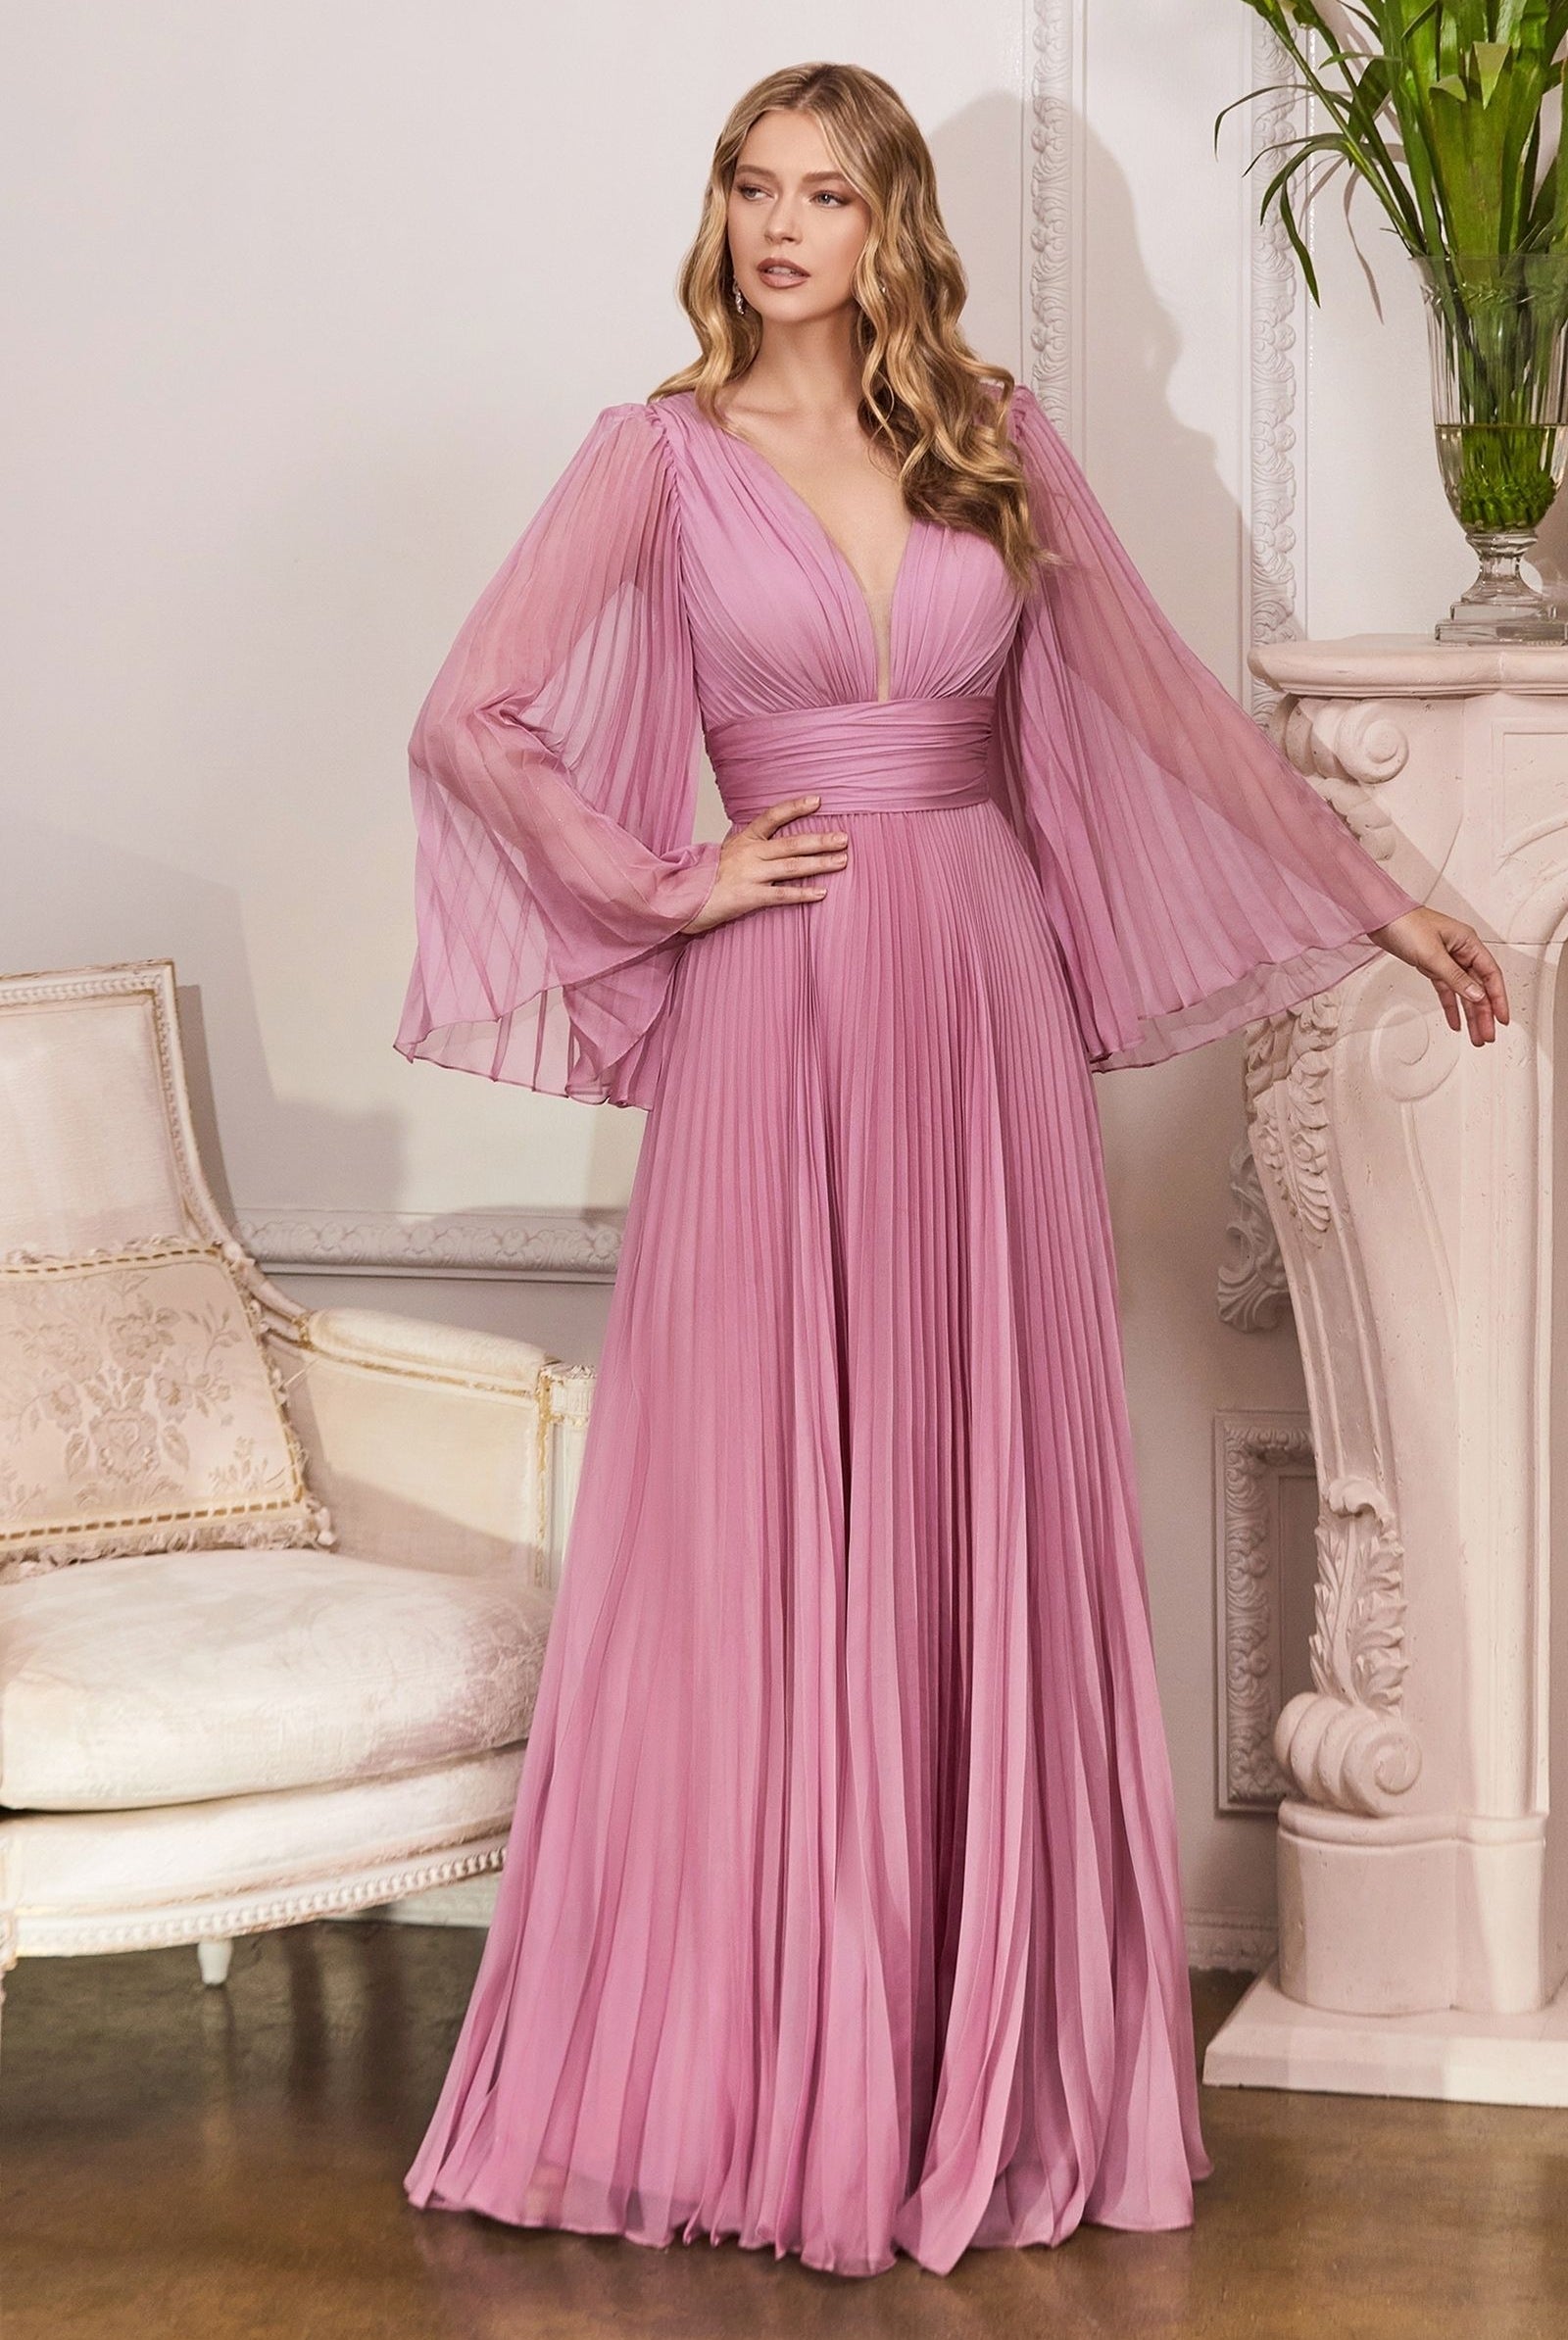 Pleated Chiffon Gown with Deep V-neckline, perfect for Mother of the Bride!-smcdress